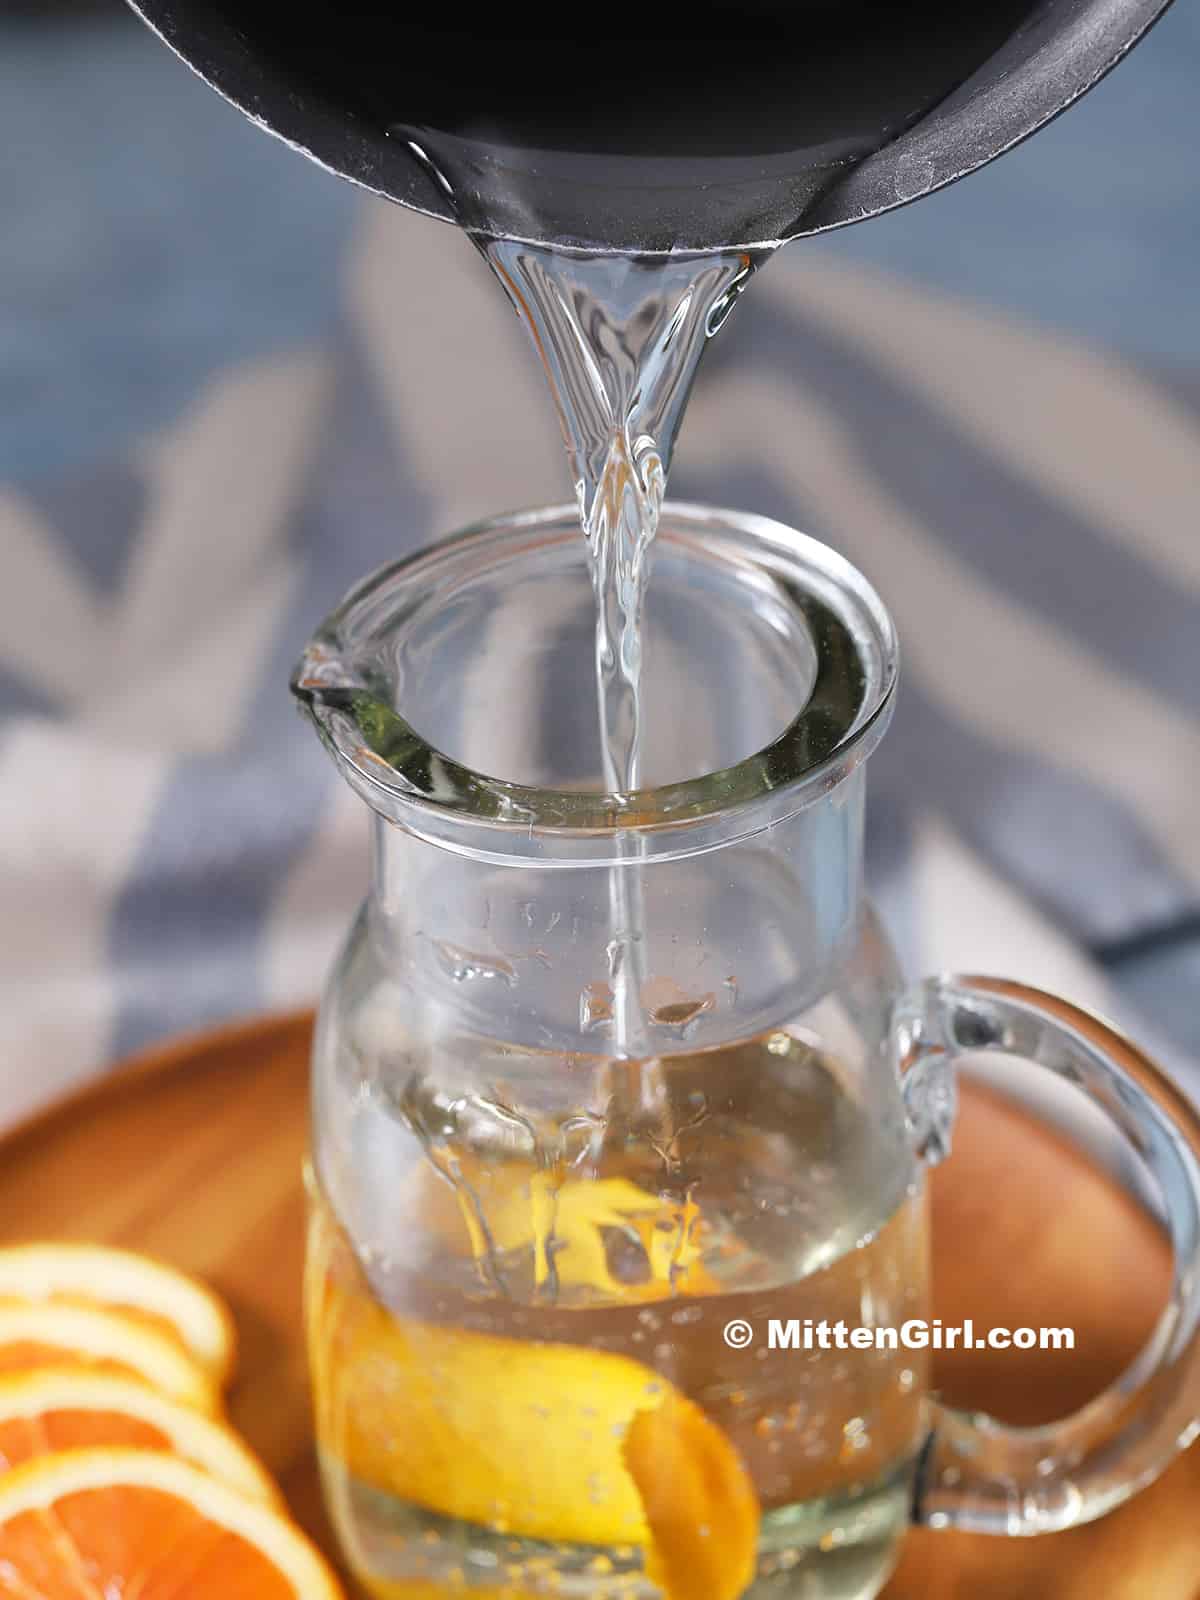 Orange simple syrup being poured into a glass container.